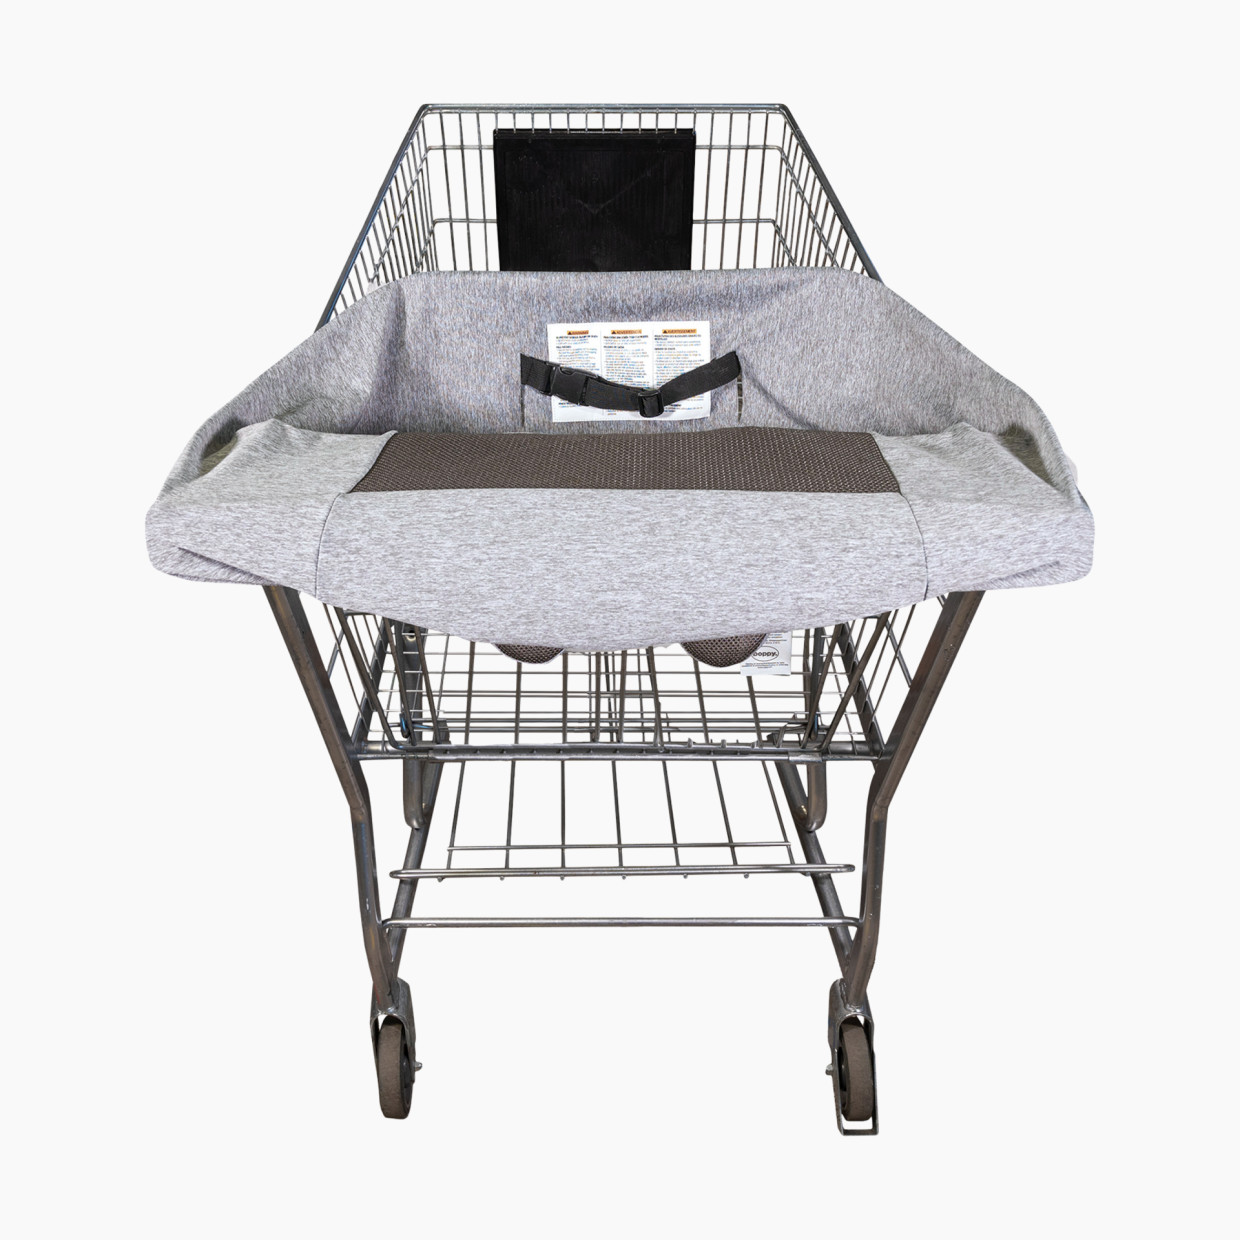 Boppy Antibacterial Compact Shopping Cart Cover - Gray Heathered.